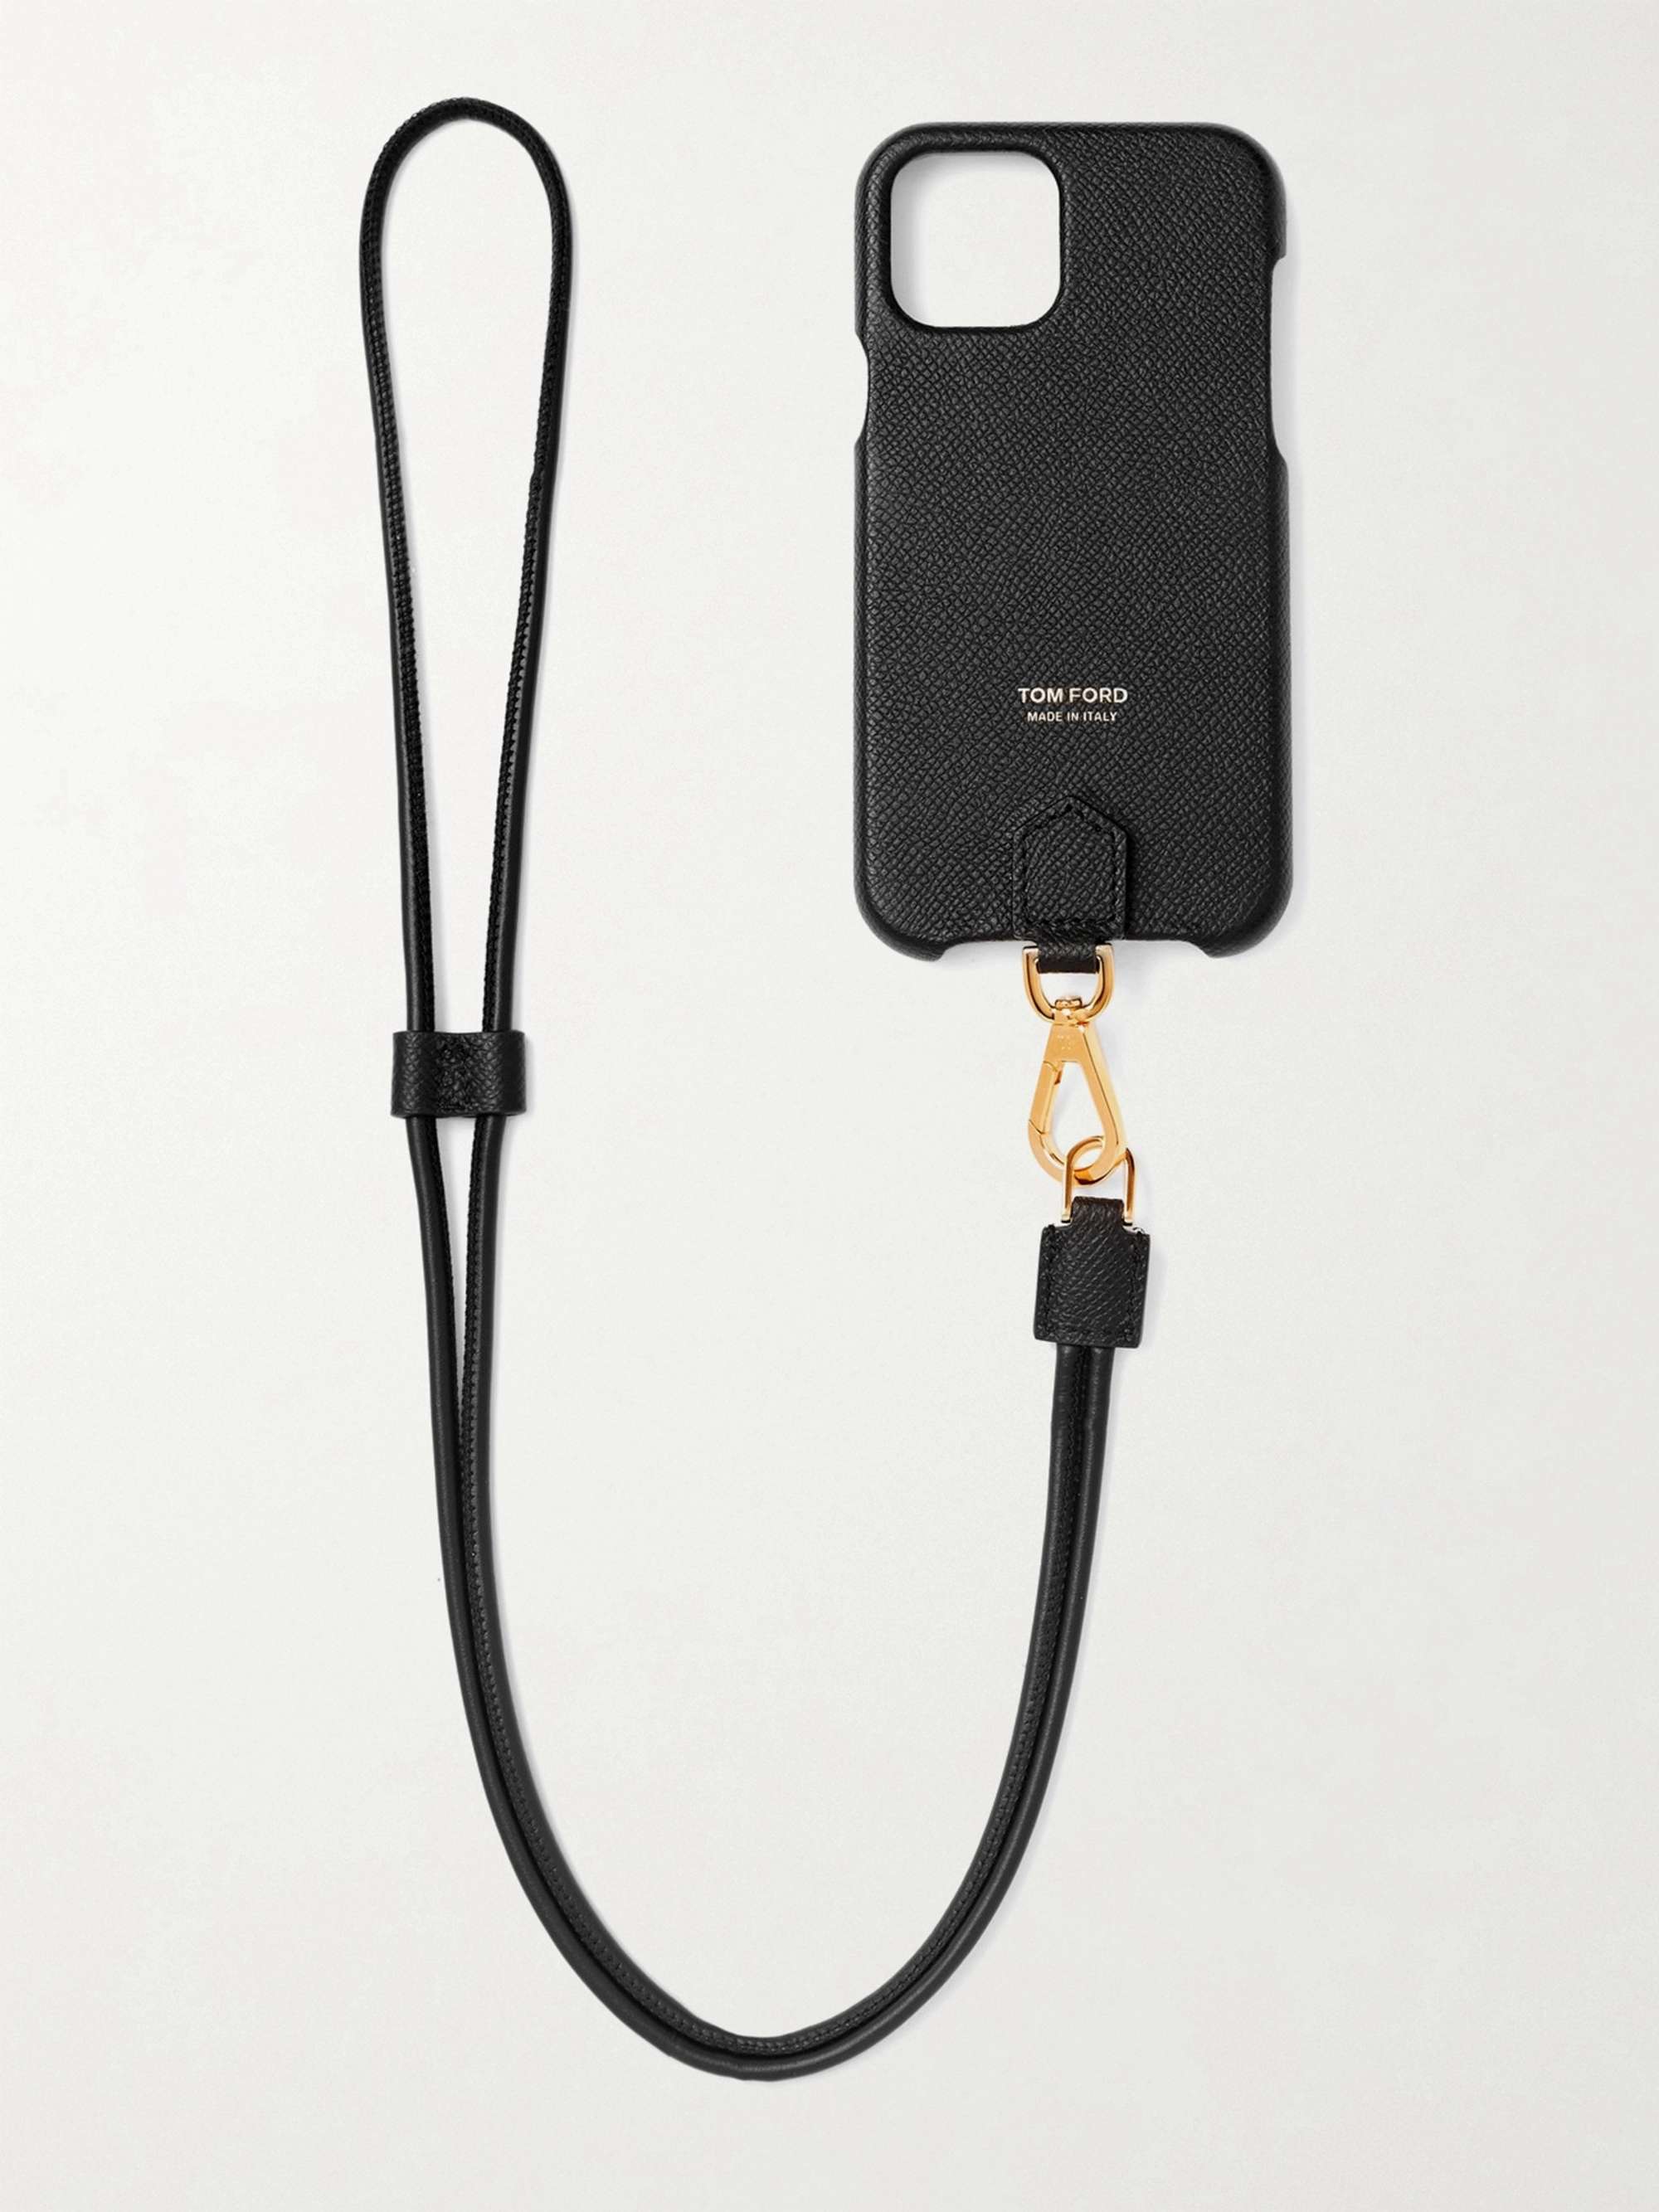 TOM FORD Floral-Print Full-Grain Leather iPhone 11 Pro Case with Lanyard